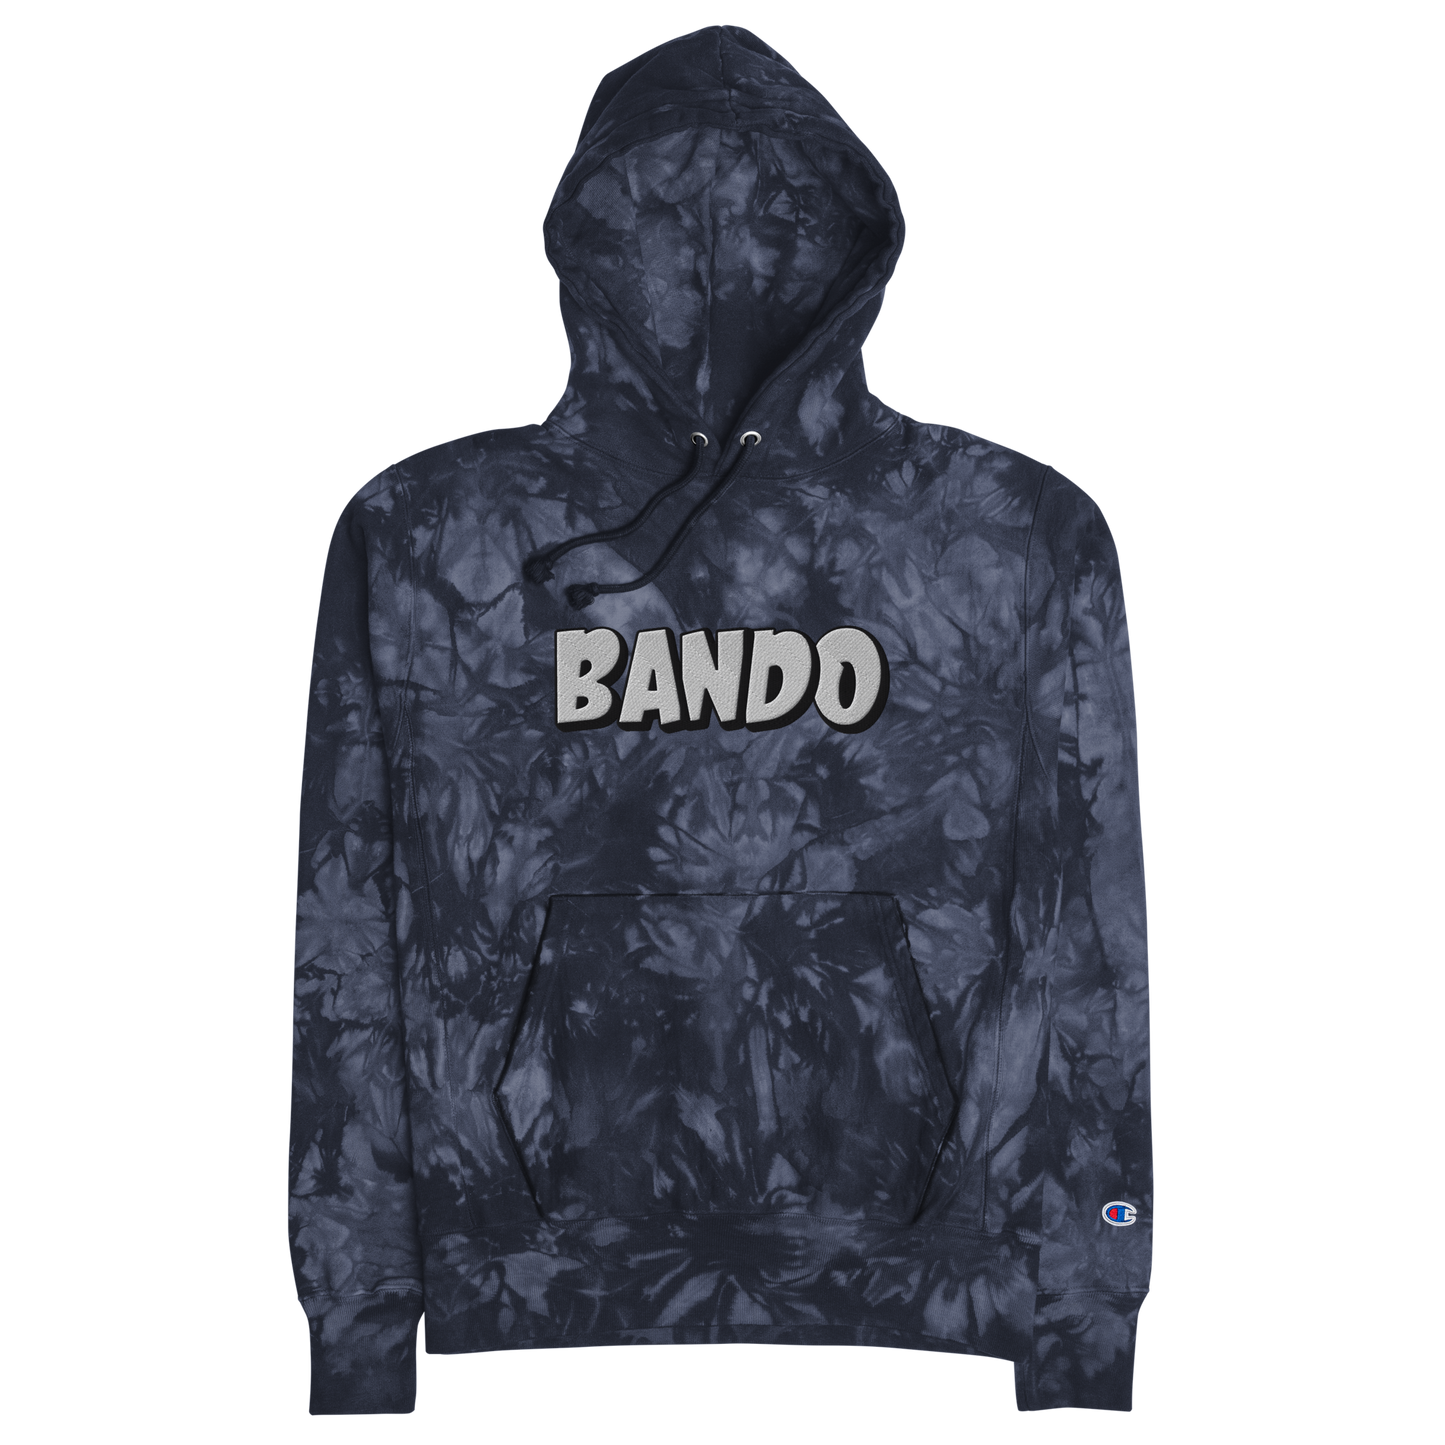 BANDO EMBROIDERED CHAMPION TIE-DYE HOODIE